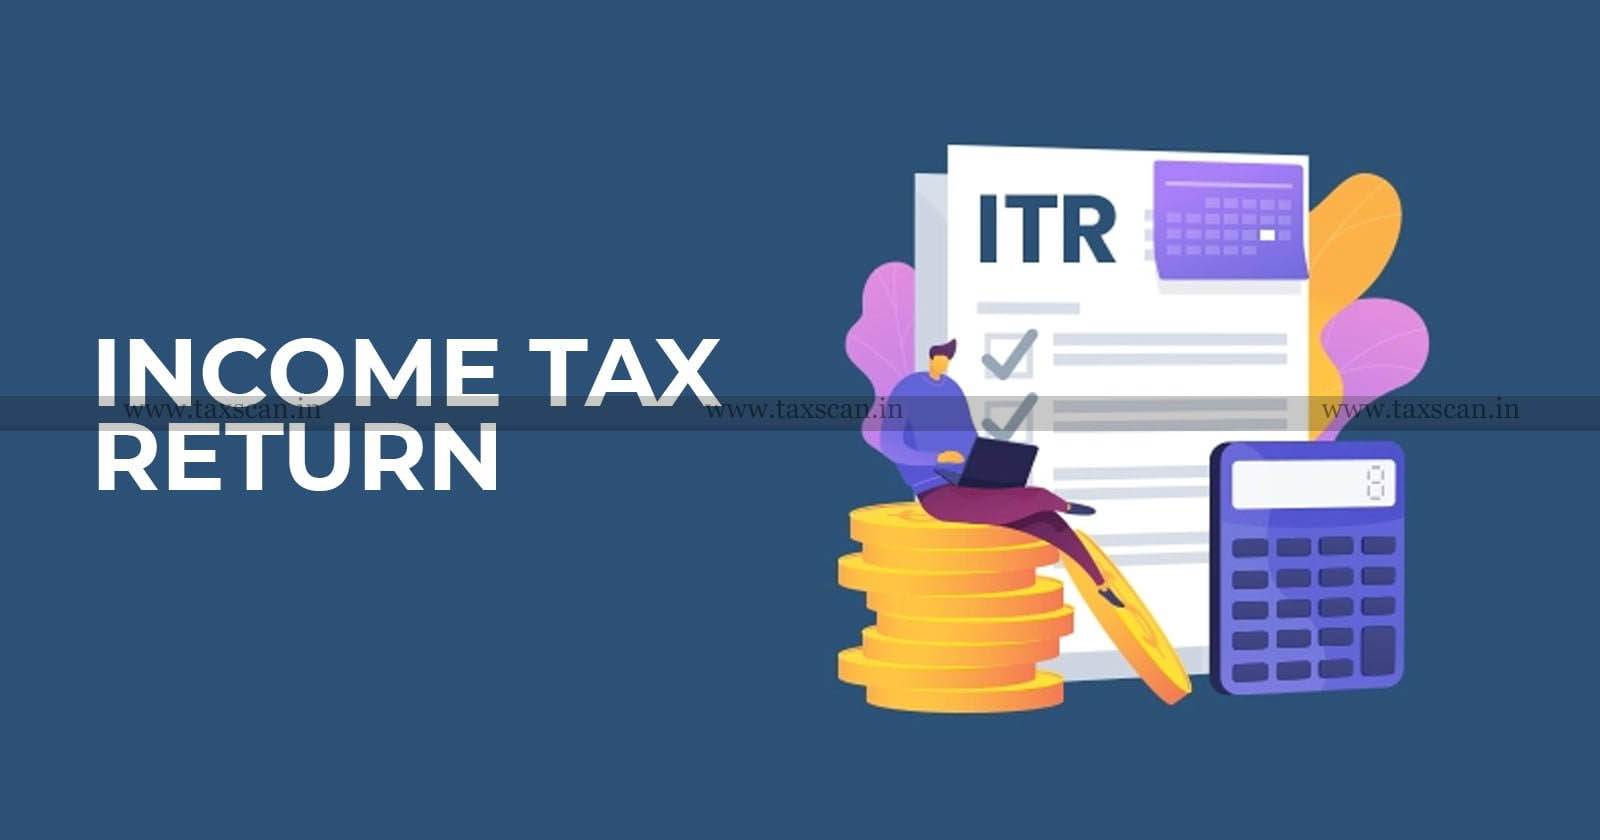 Deduction claimed - Income Tax Act can't be rejected - of Non-mentioning of Claim ITR - ITAT - TAXSCAN